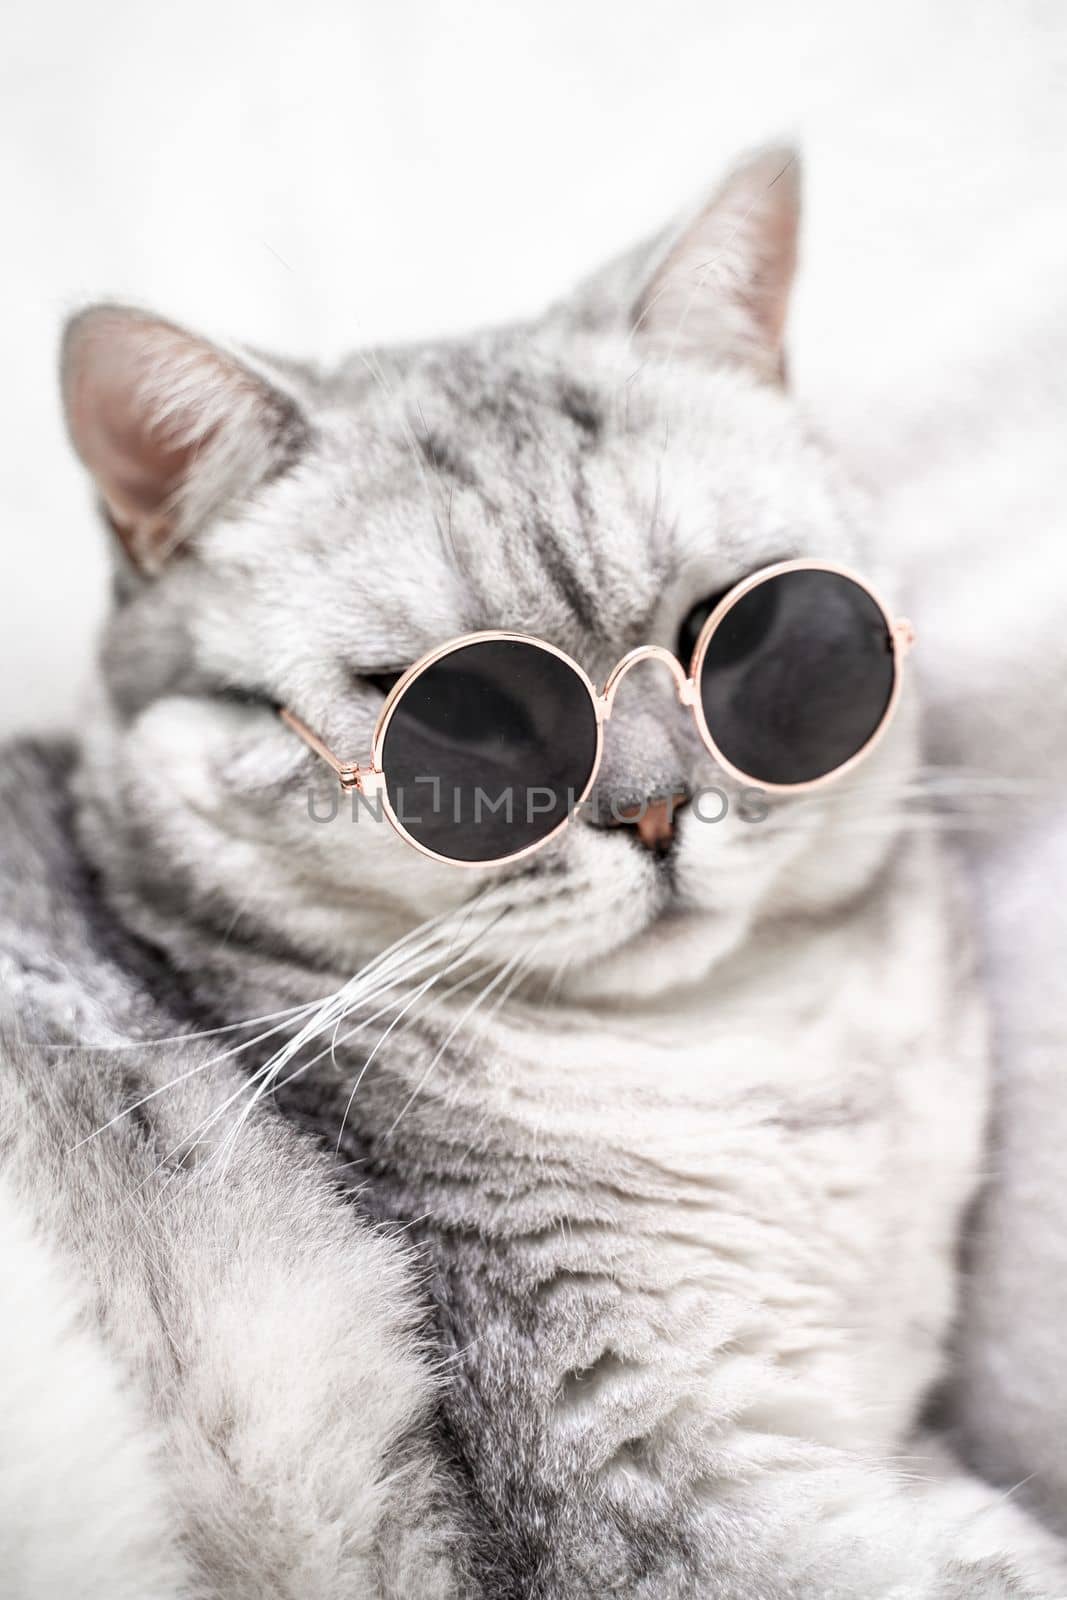 scottish straight cat in glasses, on a white background. Pets